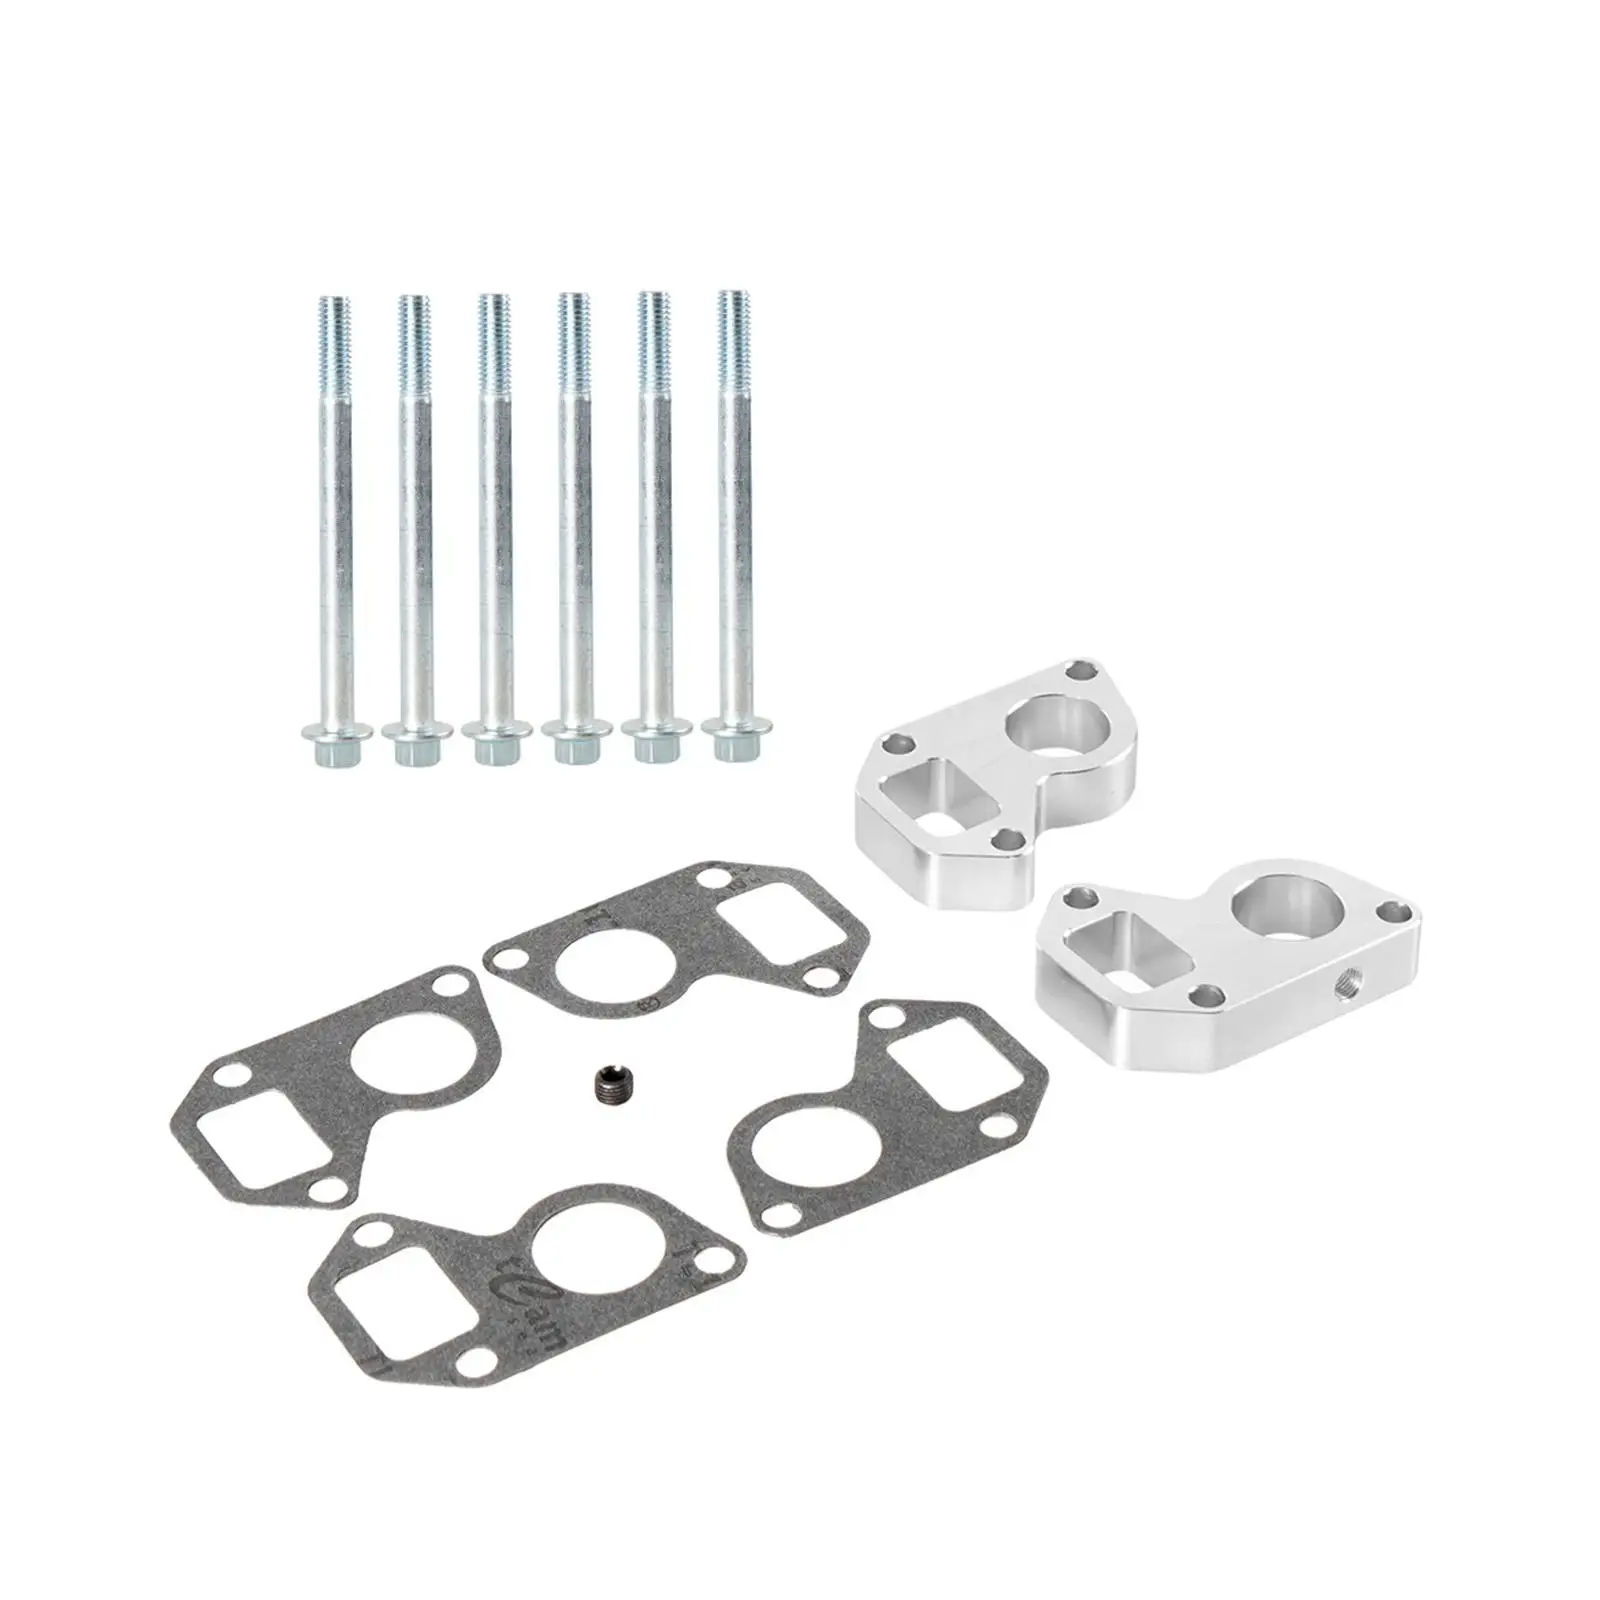 LS Water Pump Spacers Kit Bolts DIY Tool Replacement Water Pump Spacer Adapter Swap Kit for Camaro LS1 to Truck LSX Lq9 Lq4